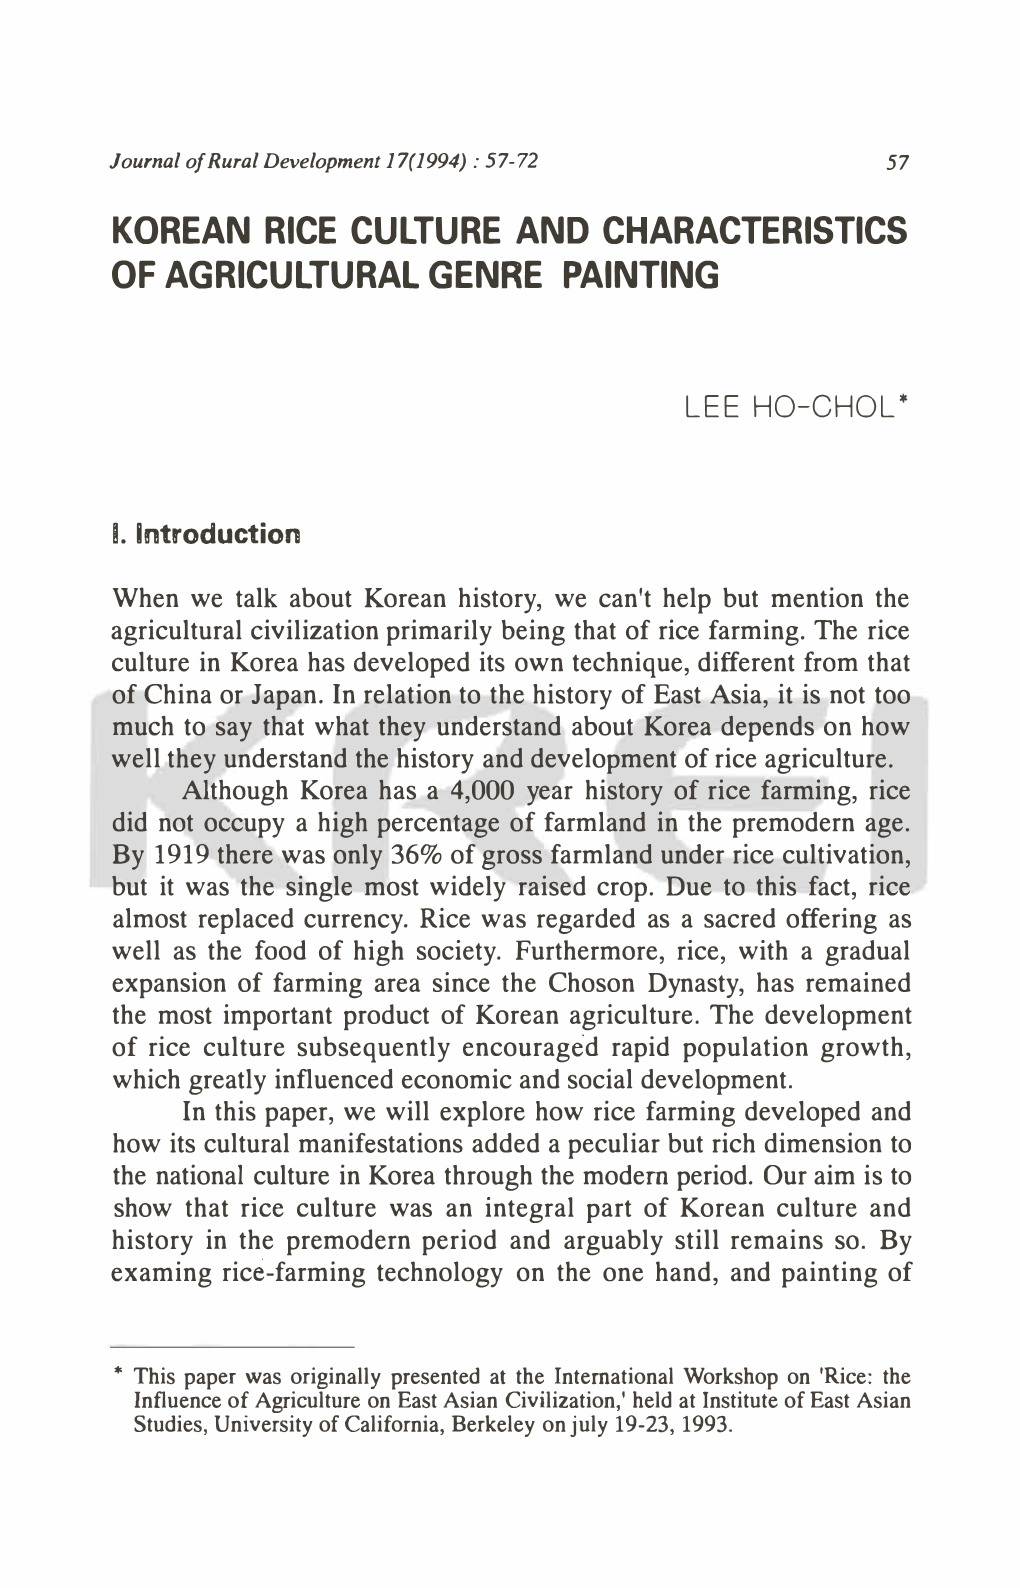 Korean Rice Culture and Characteristics of Agricultural Genre Painting